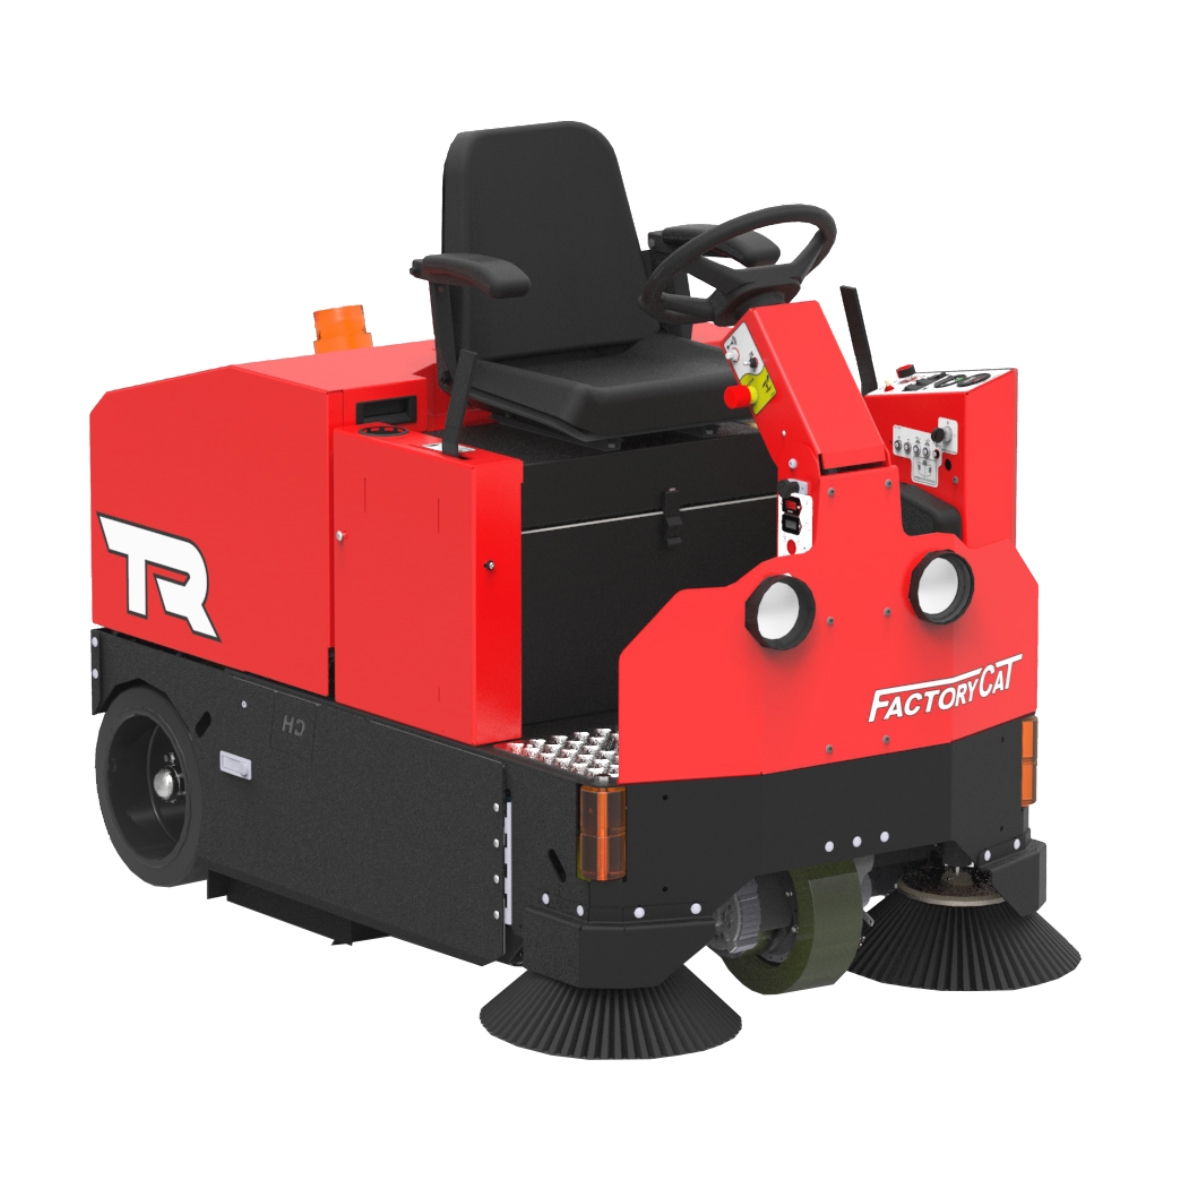 Factory Cat's Floor Sweepers sweepers are built to sweep factories: dirt, dust, metal shavings, foundry sand, bolts, paper, wood, etc. Factory Cat's are compact, not light-duty.